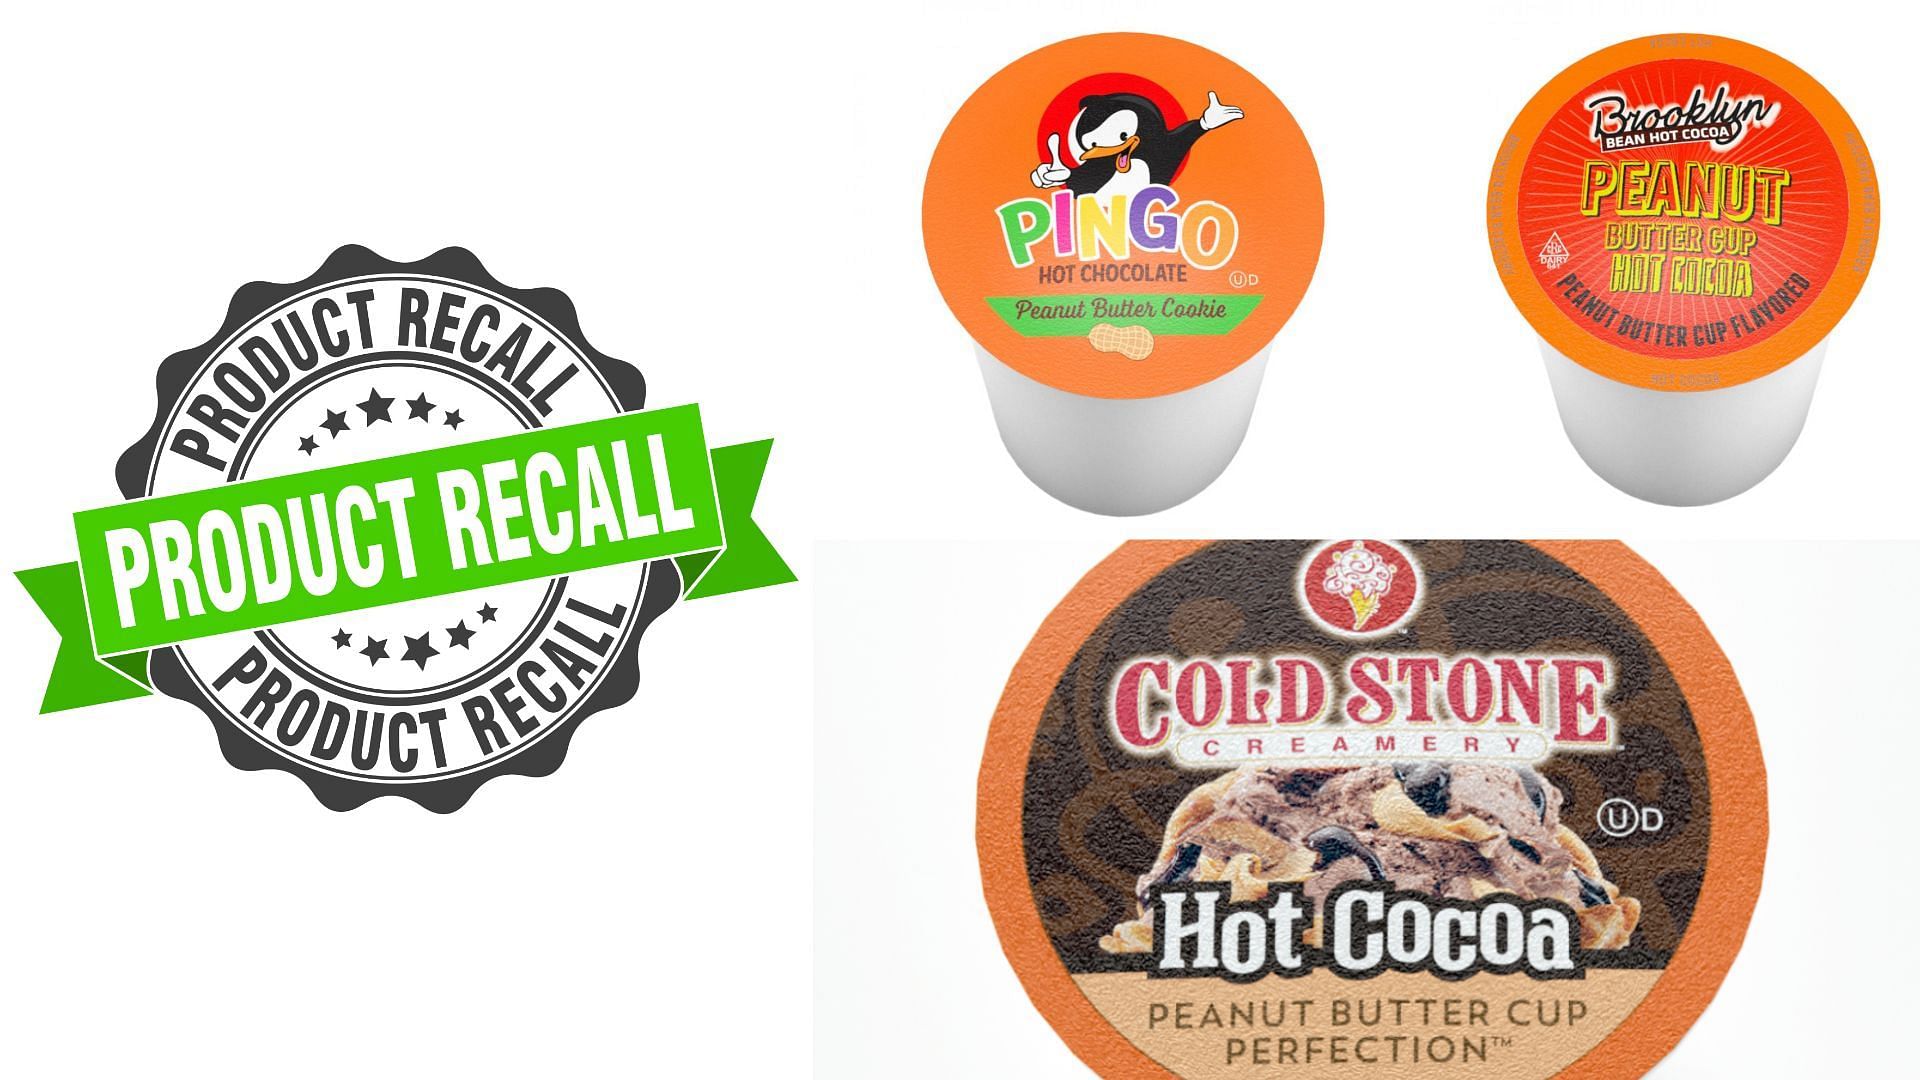 Two Rivers Coffee recalls three flavors of Peanut Butter and/or Hot Cocoa Pods over undeclared peanut allergens concerns (Image via FDA)